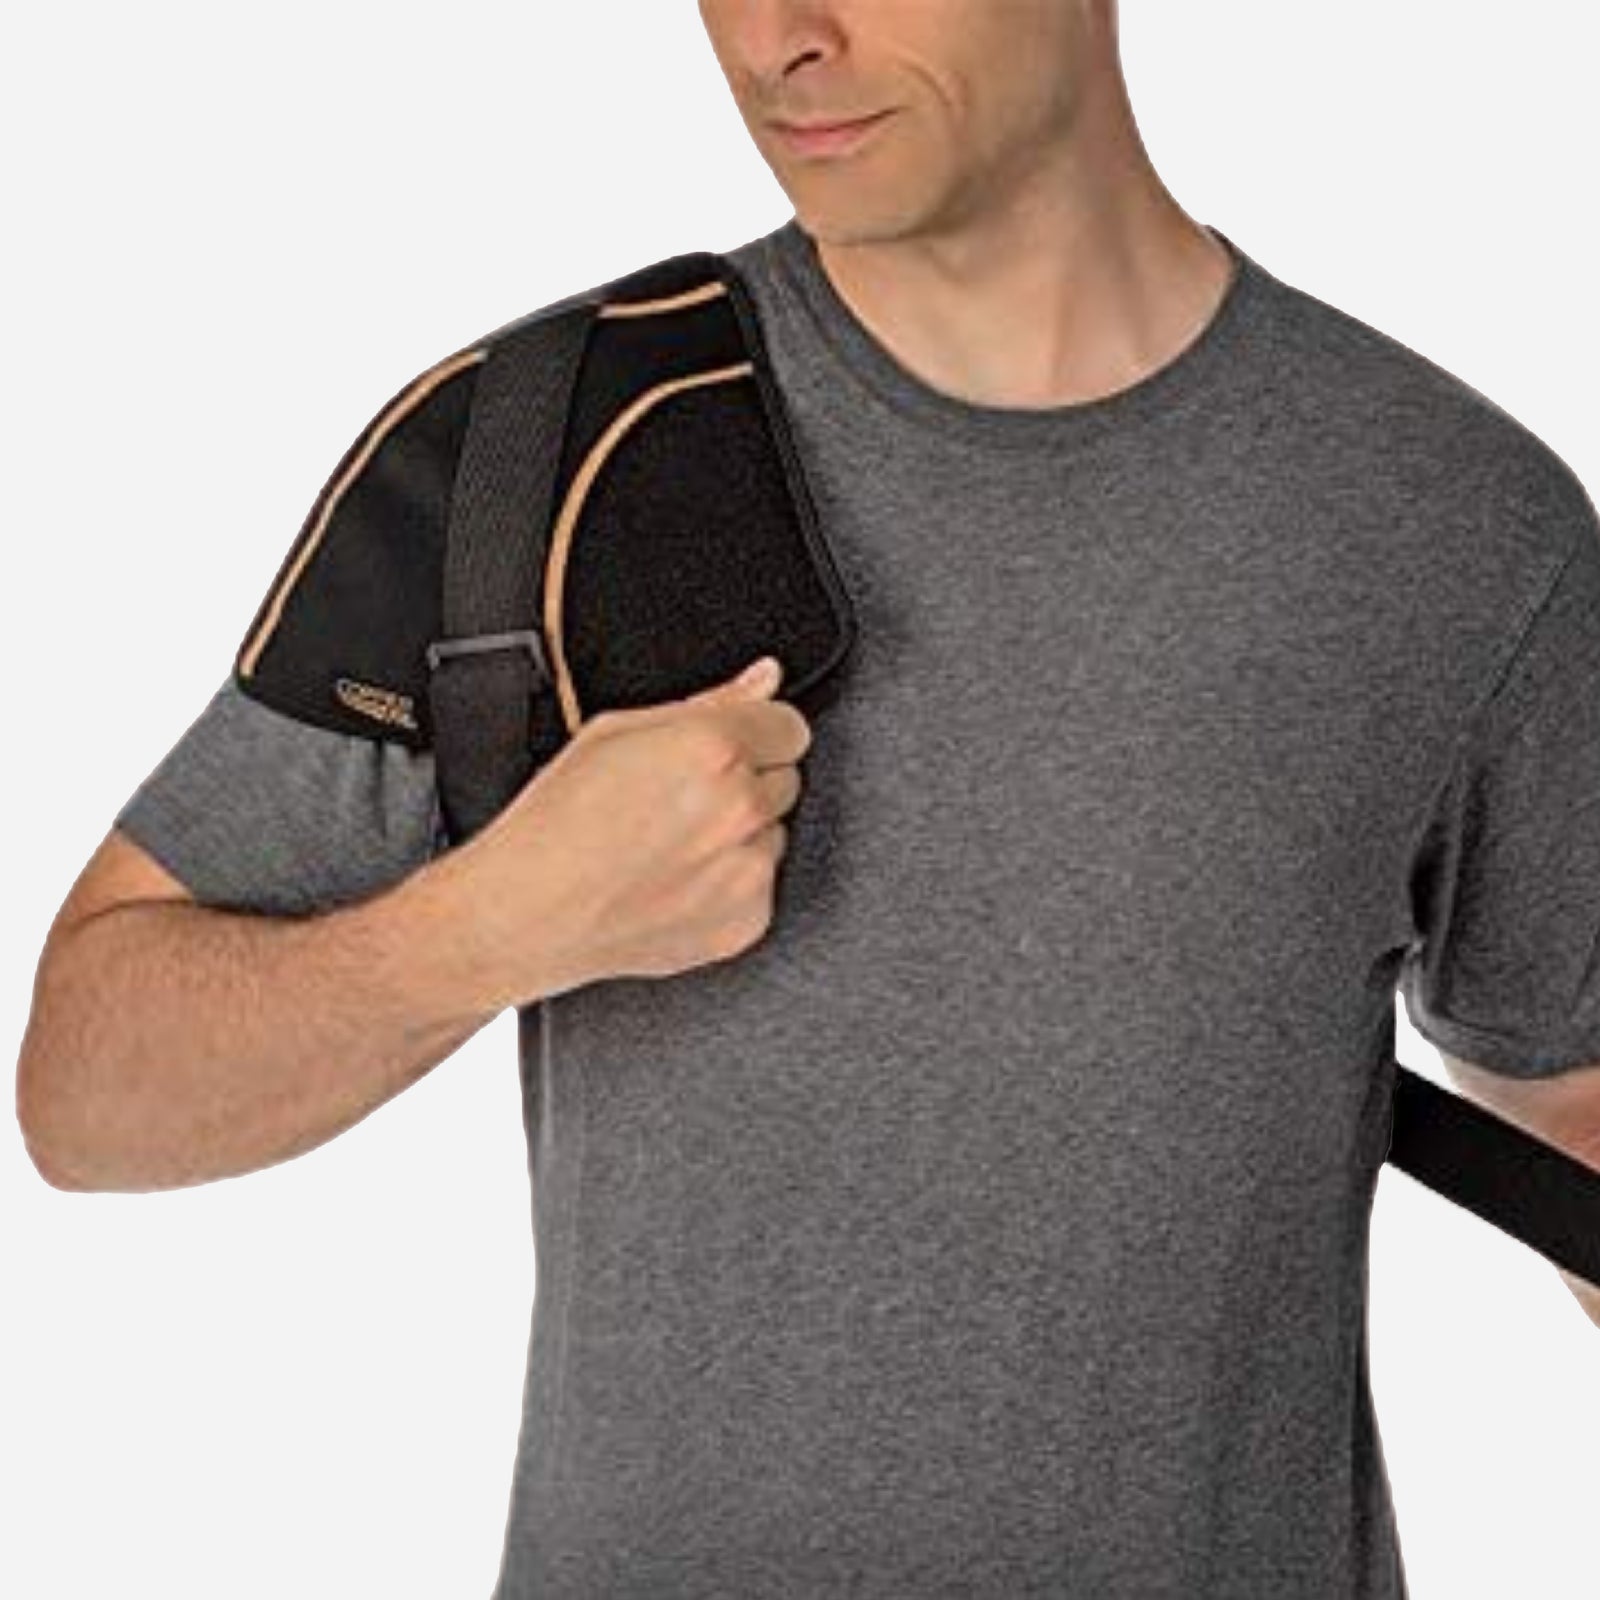 Copper Fit Adjustable Back Brace with Gel Pack Insert, Lumbar